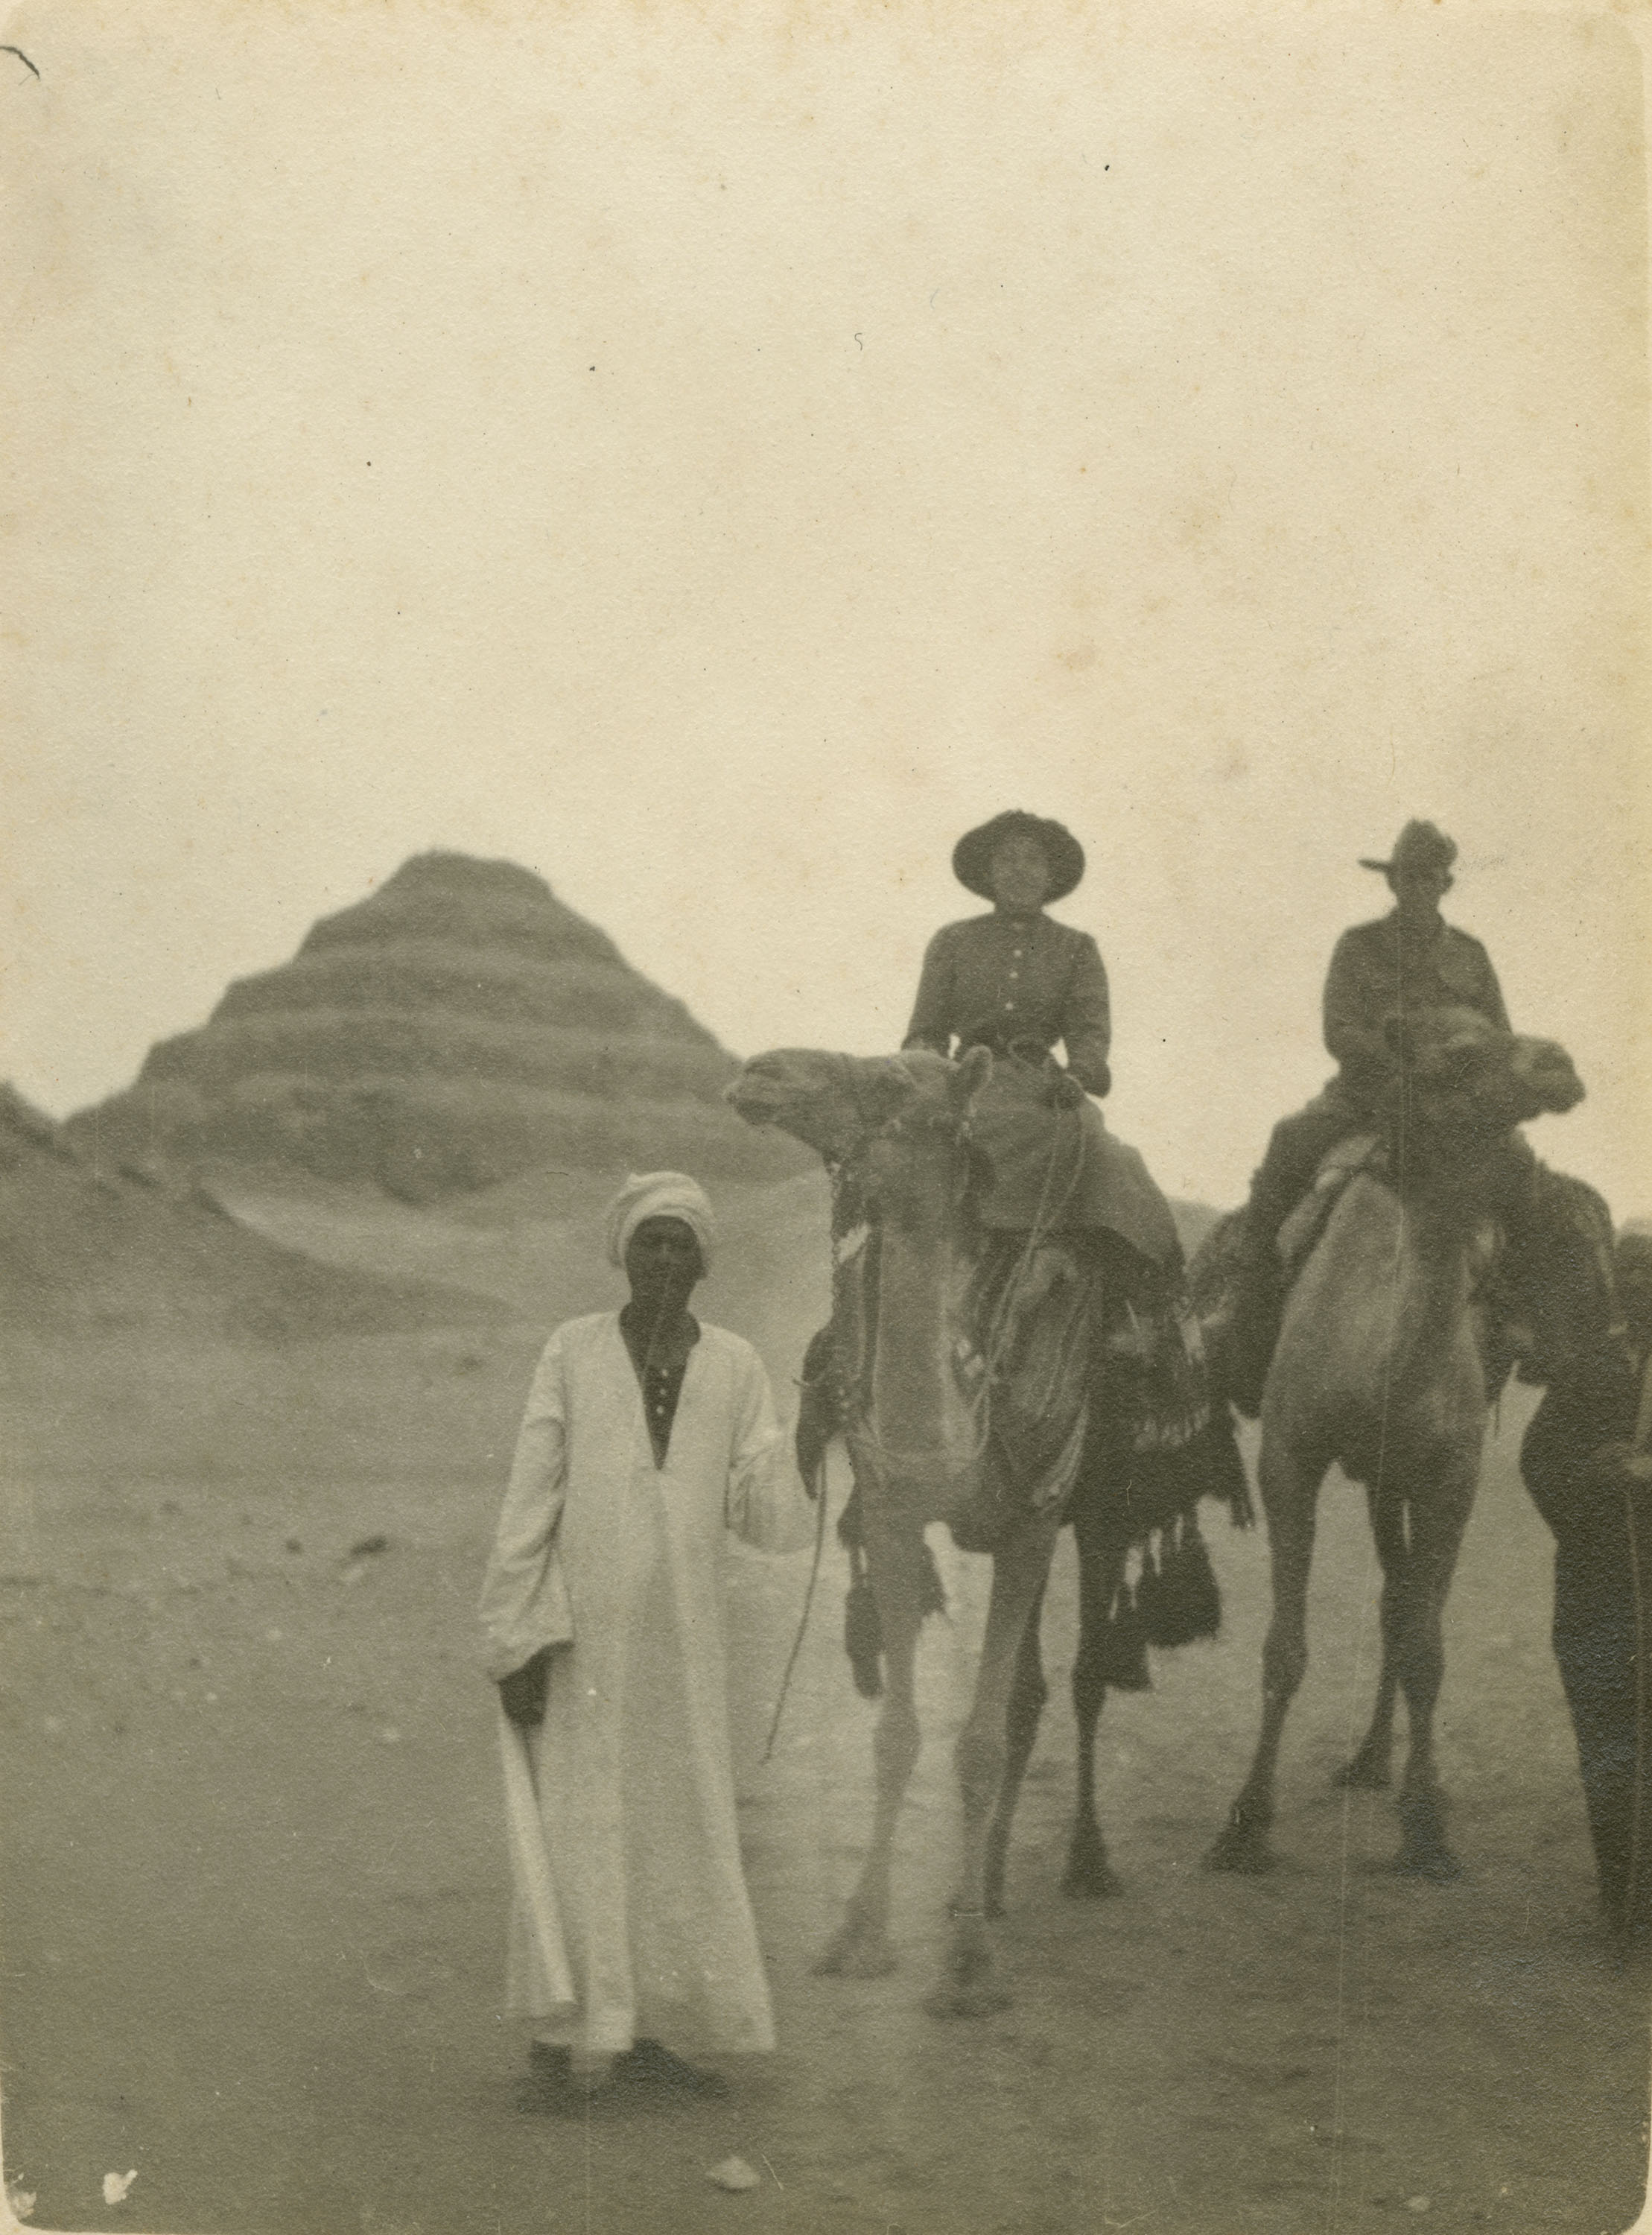 Two people on camels being led by two men with step pyramid in background